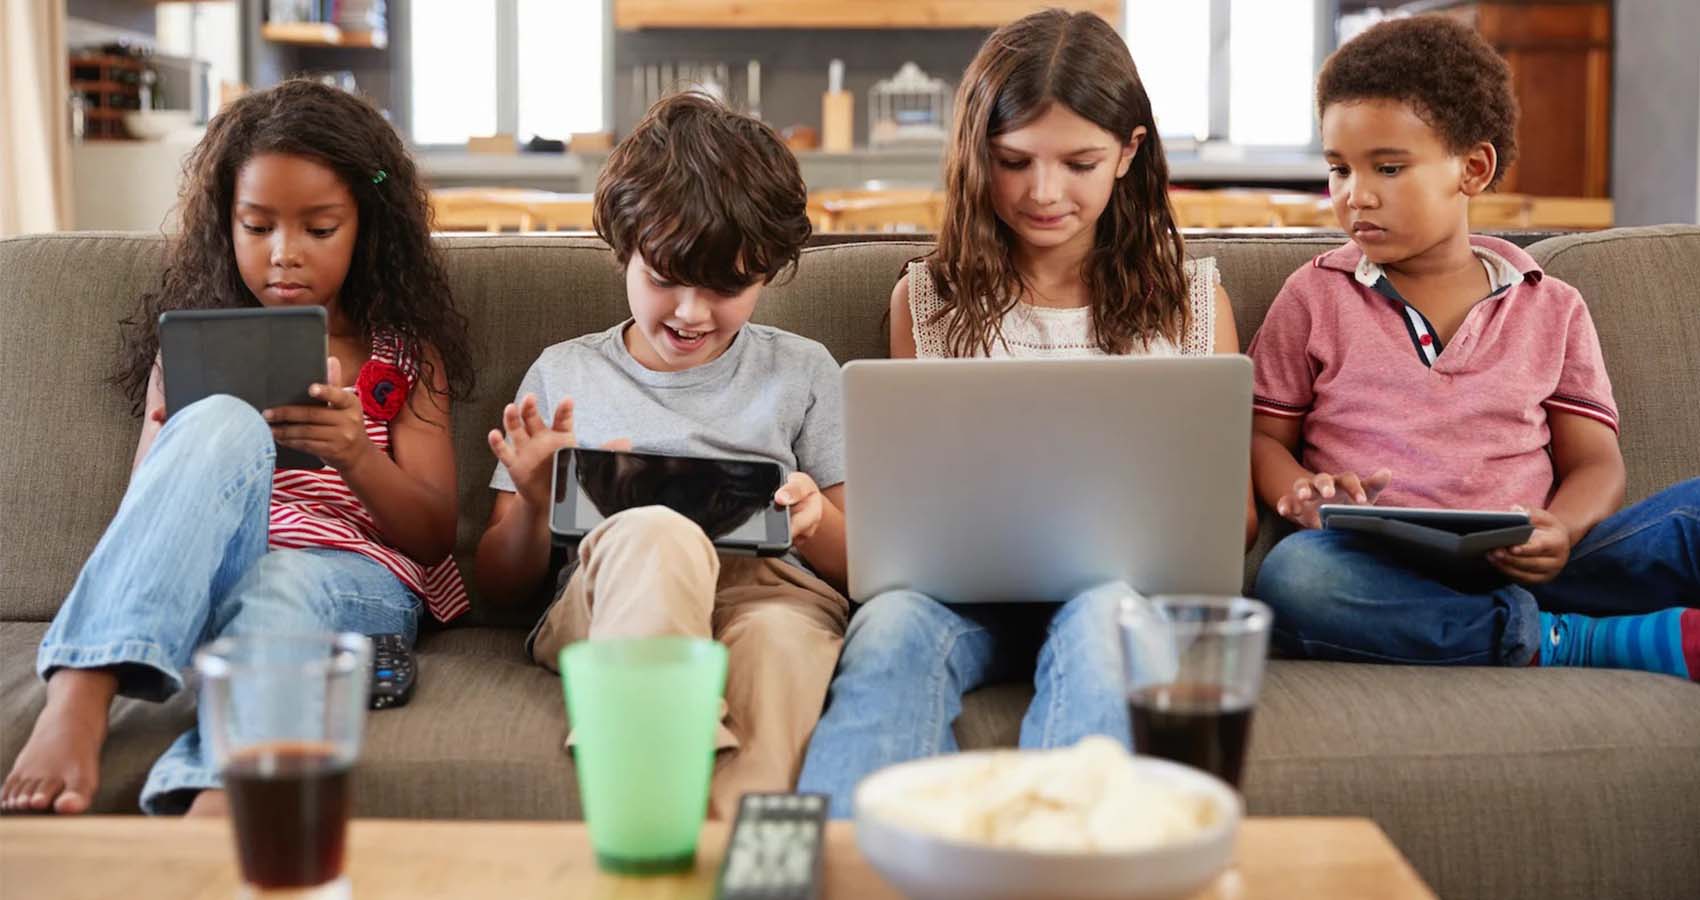 Involve Your Kids In Happier Activities To Reduce Screen Time